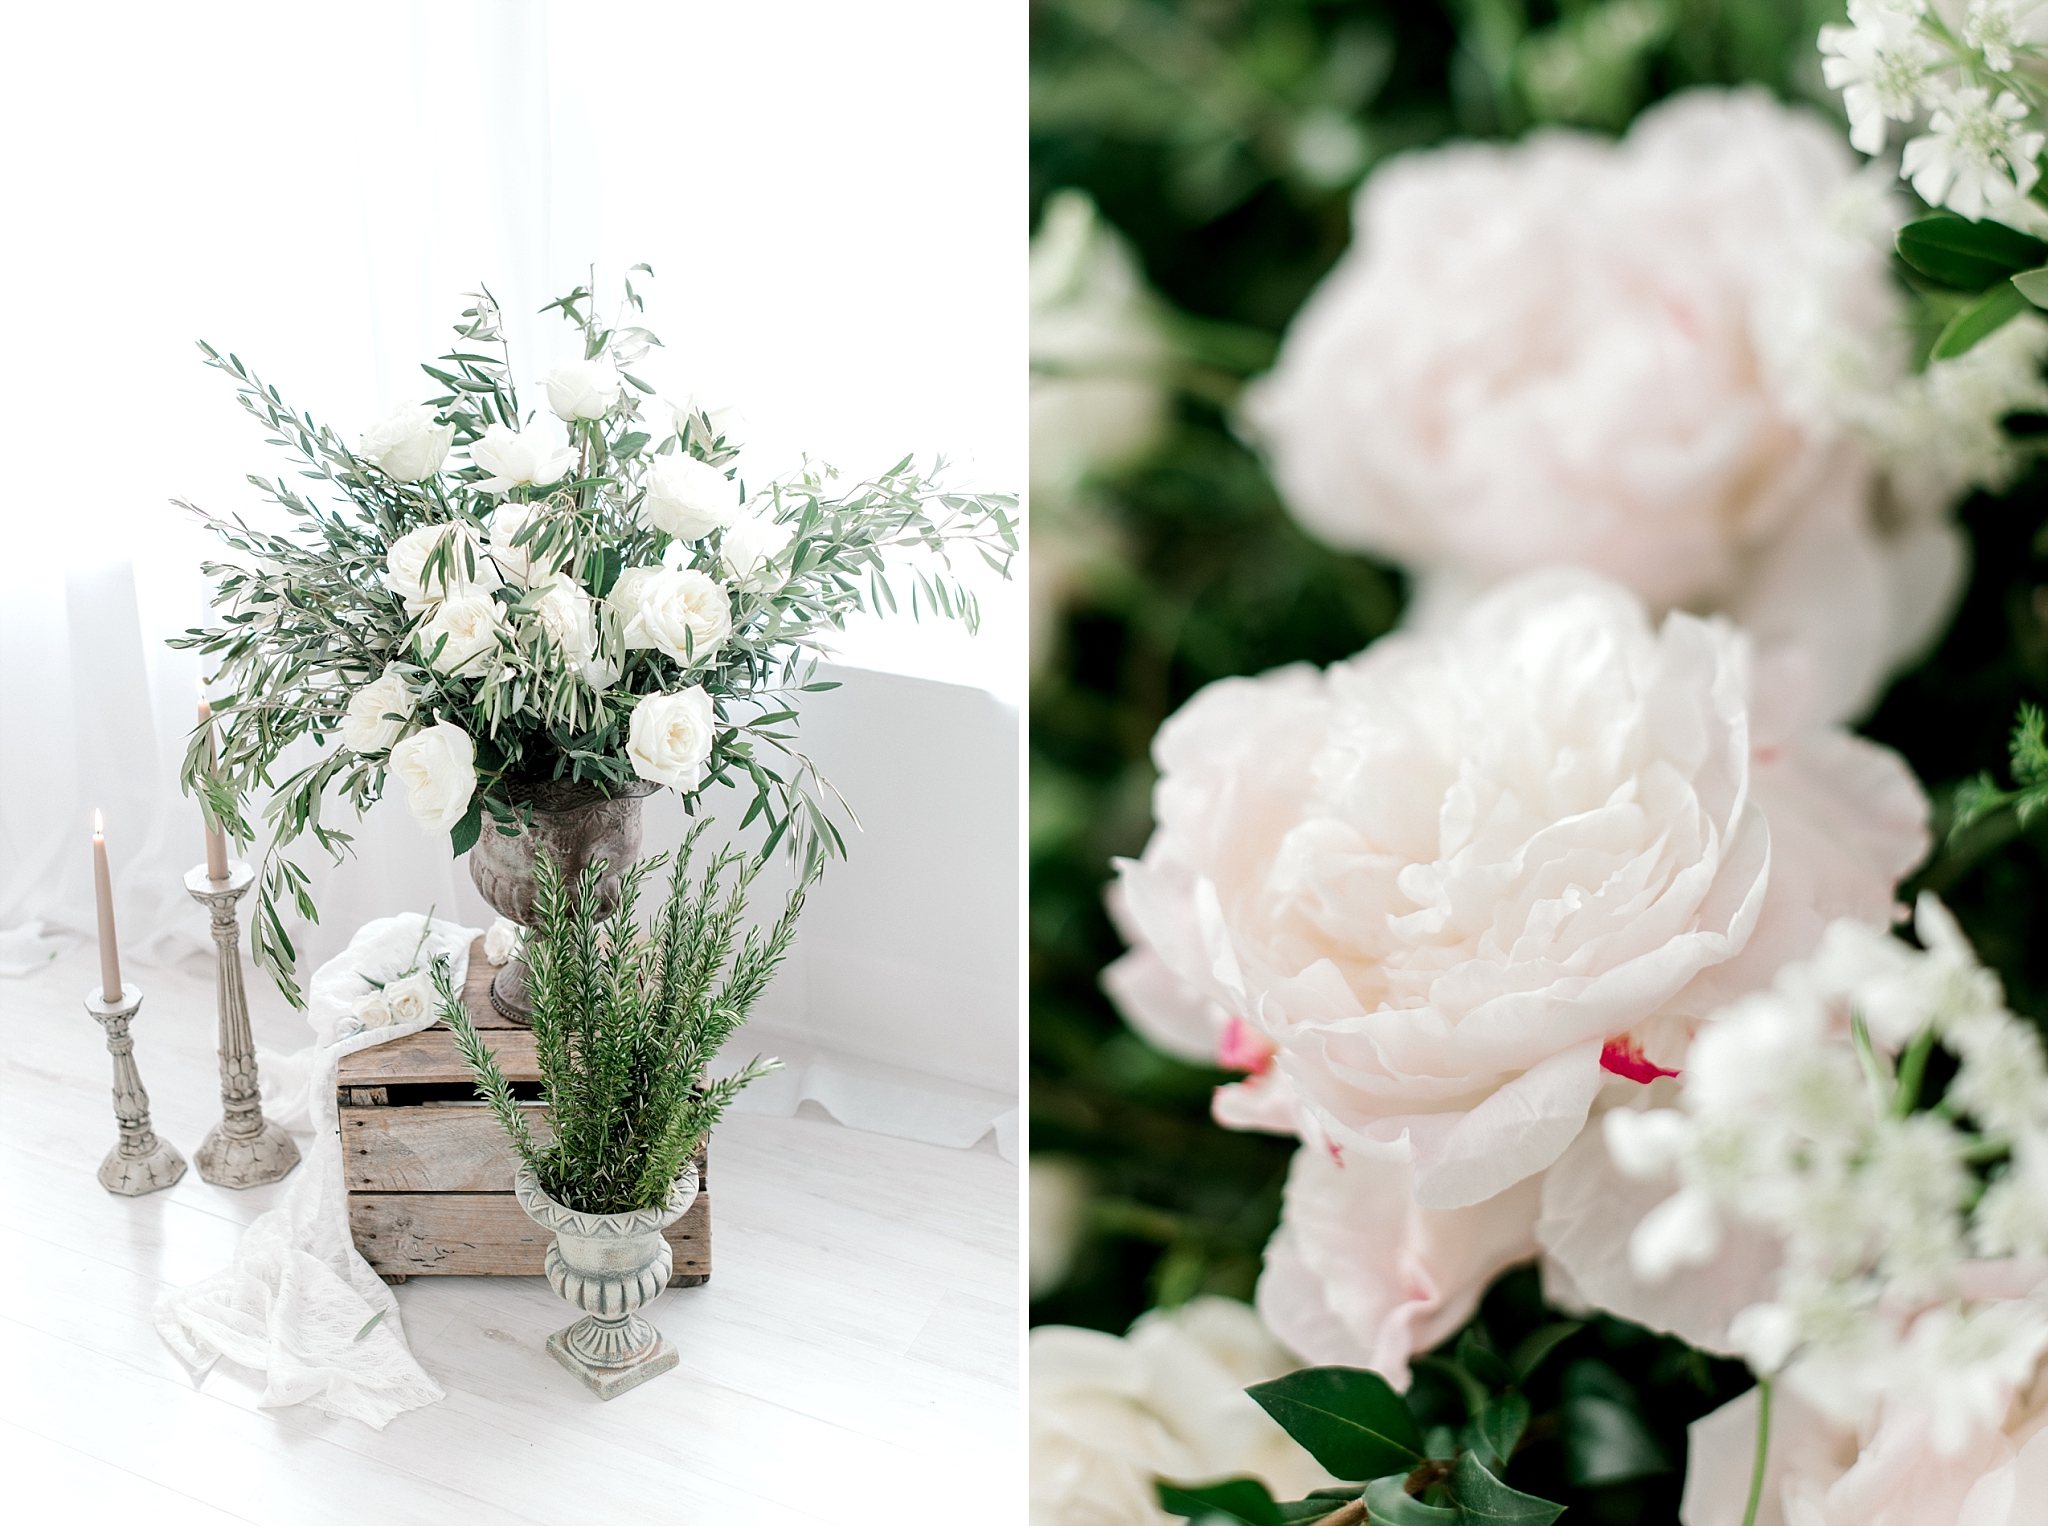 White roses and greenery